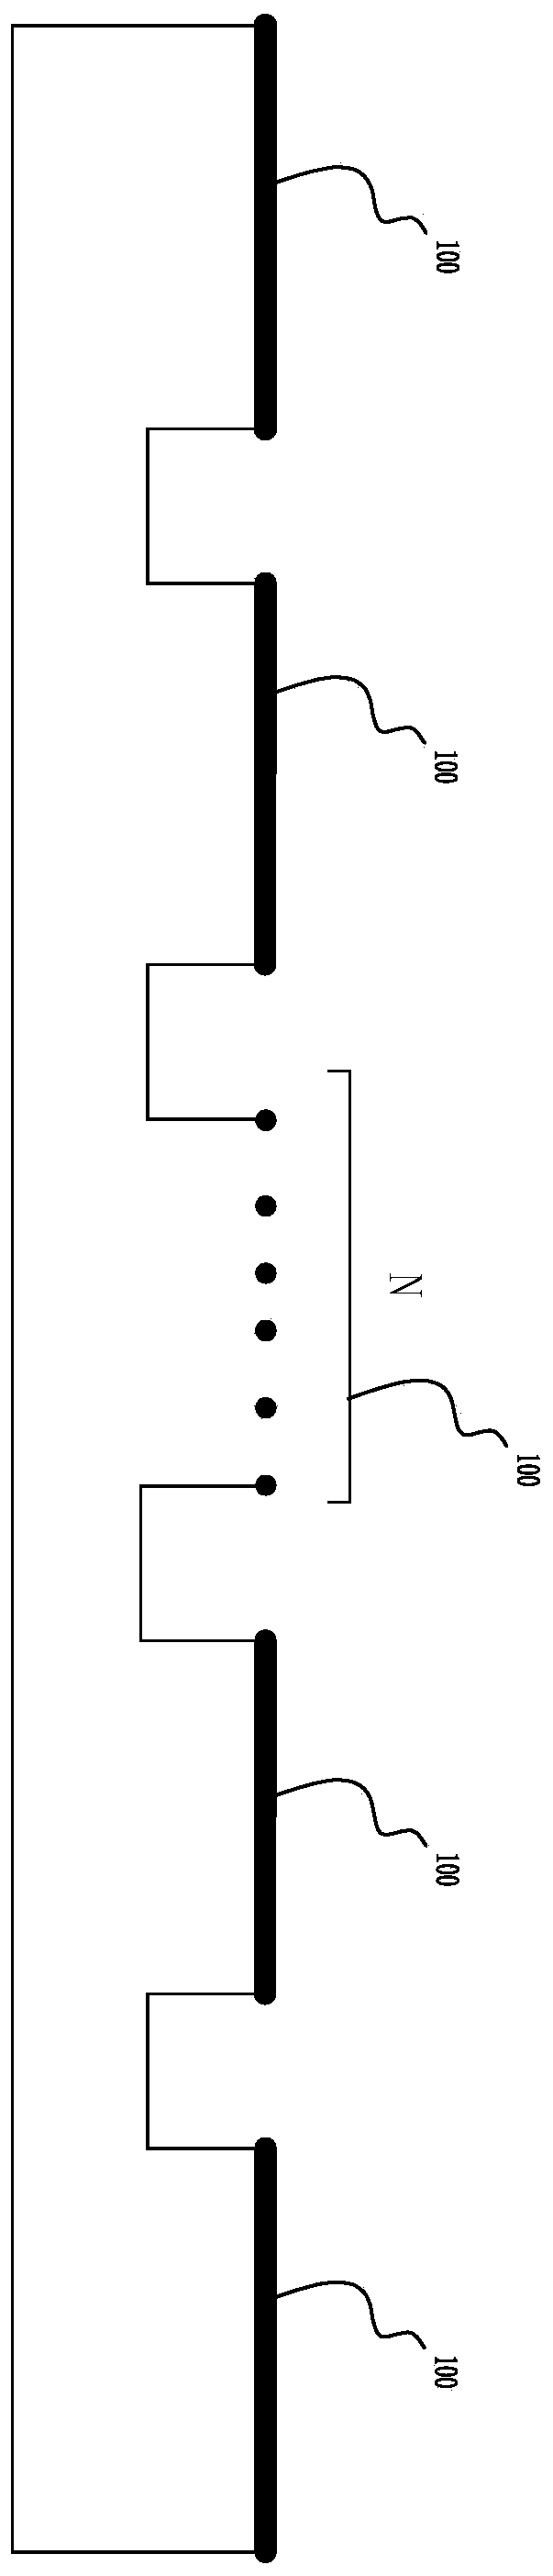 Single-bus wiring structure